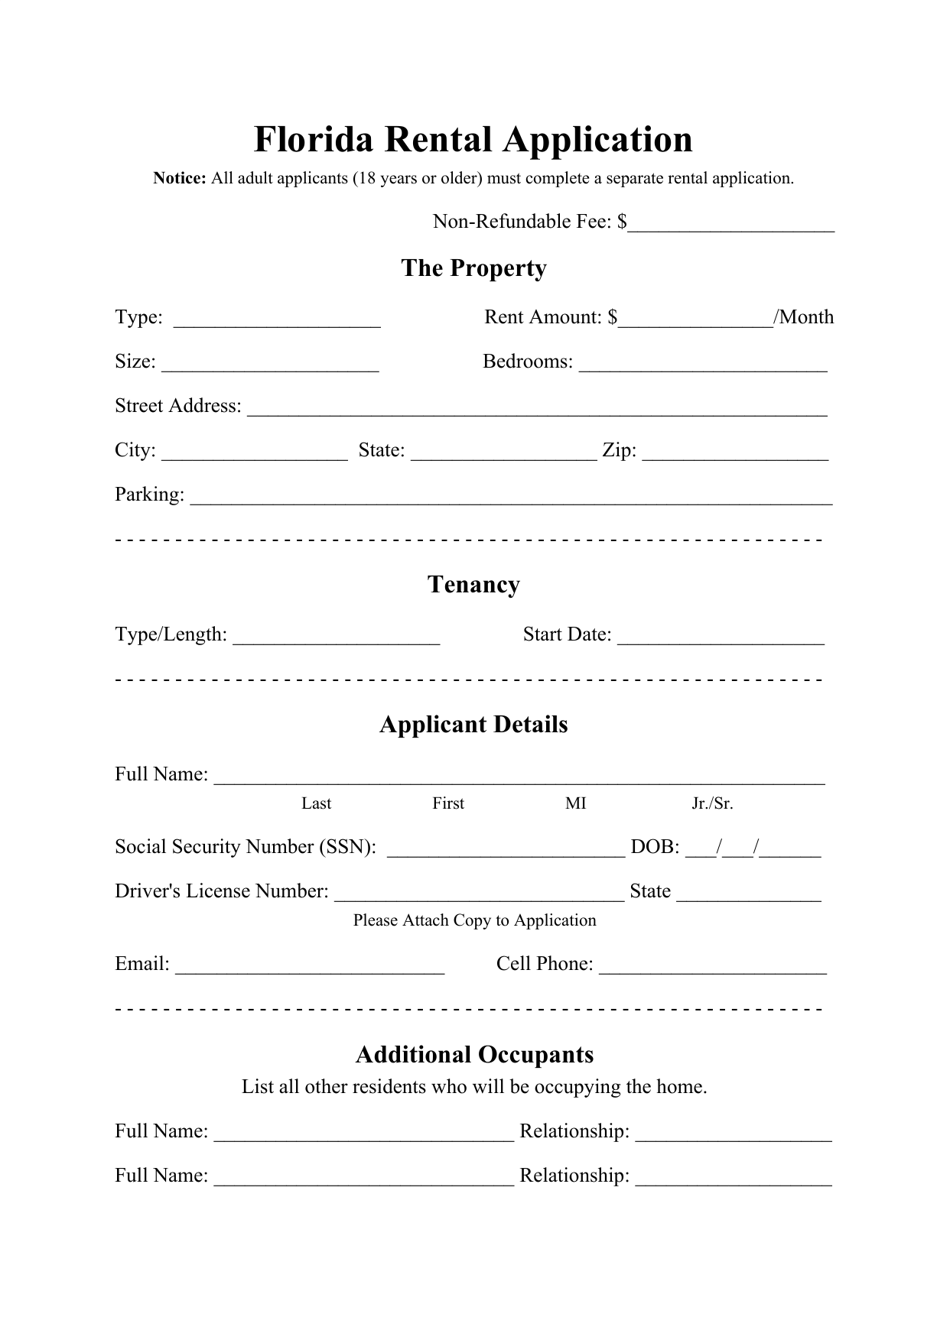 florida-rental-application-form-fill-out-sign-online-and-download-pdf-templateroller